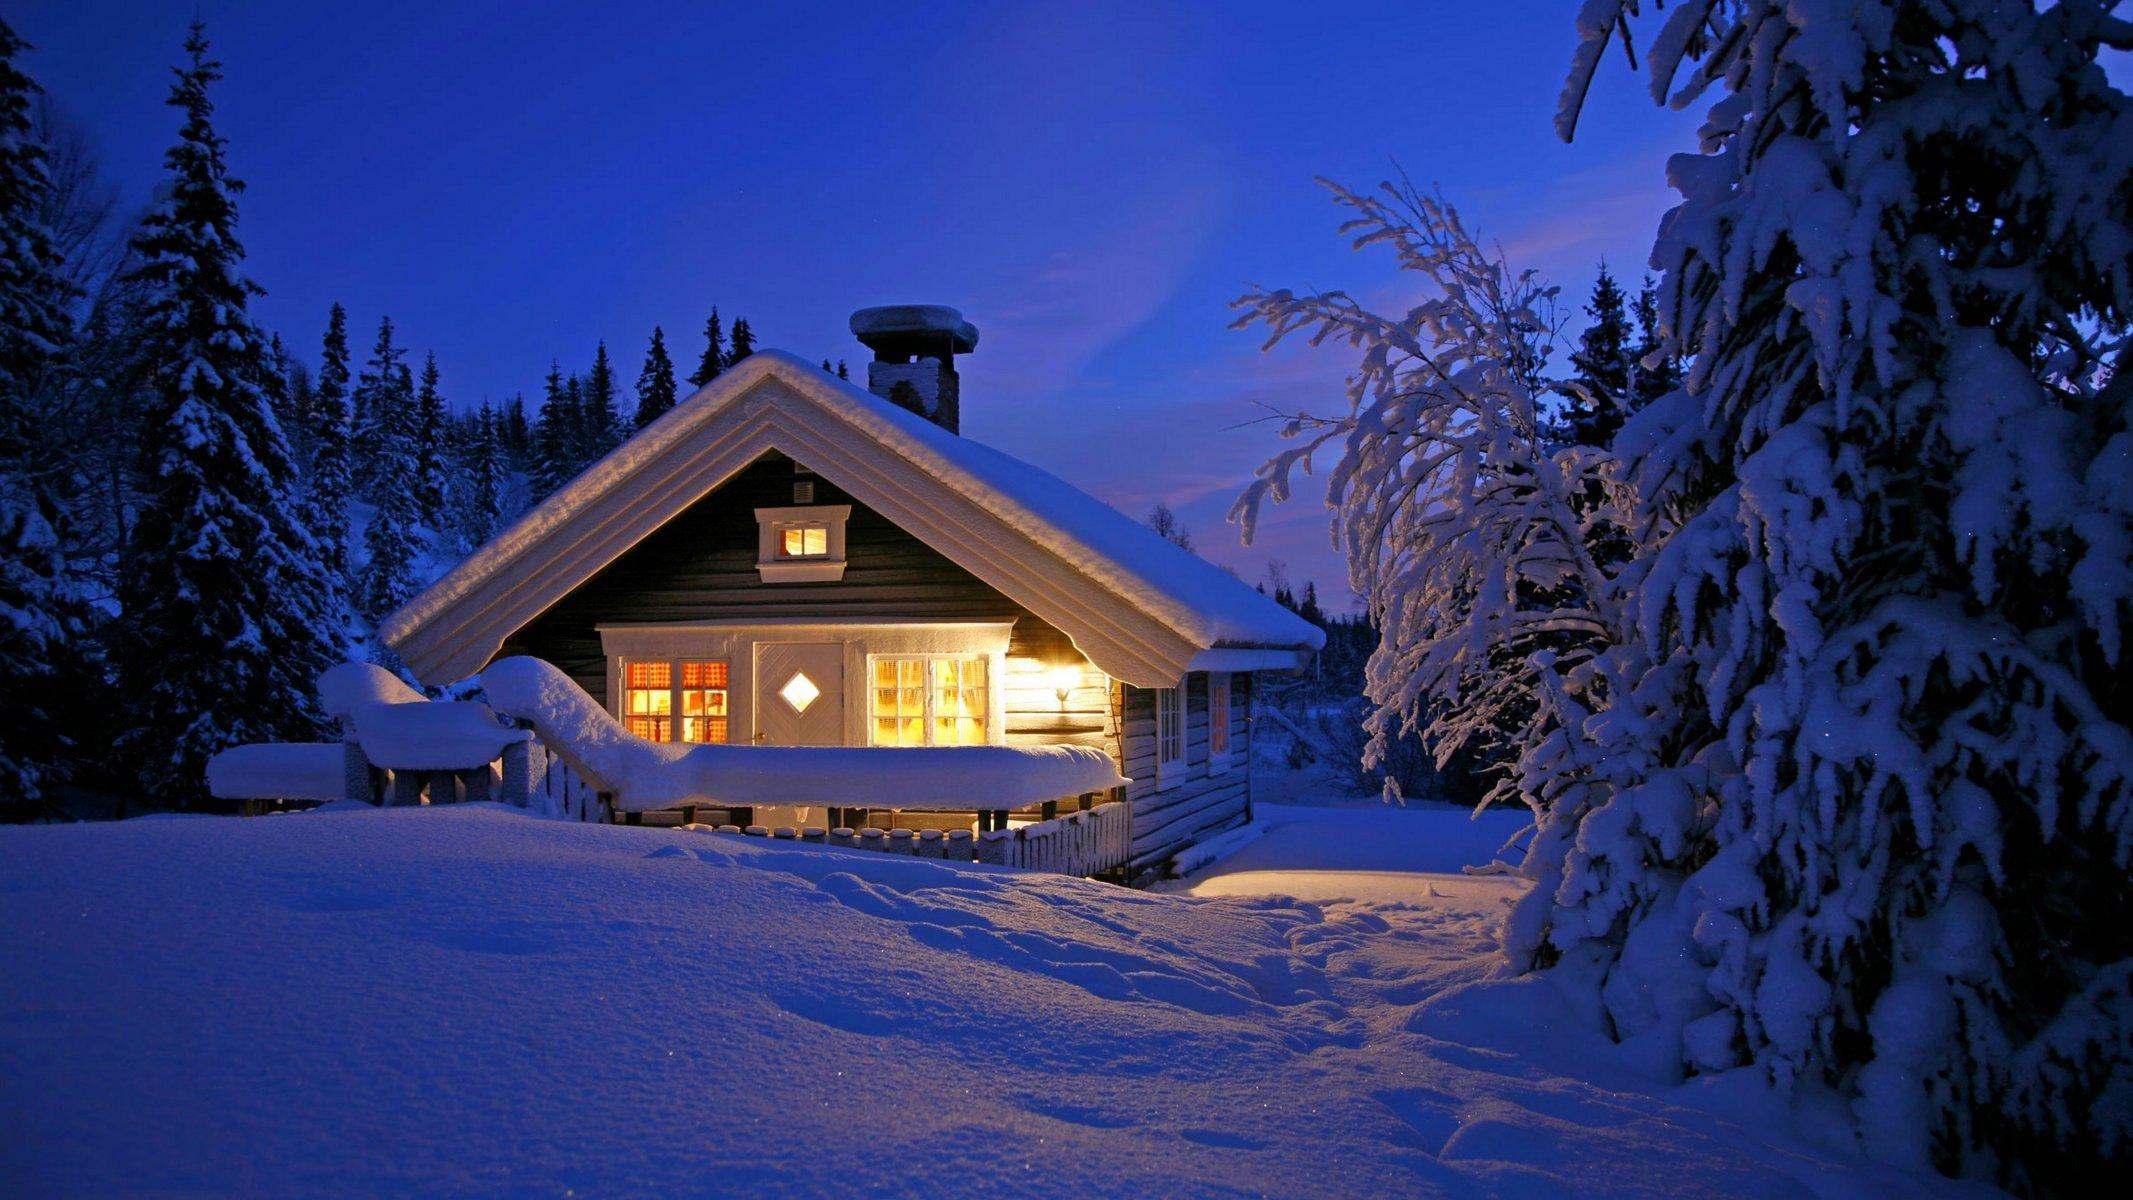 House on Winter Night HD Wallpaper. Background Image